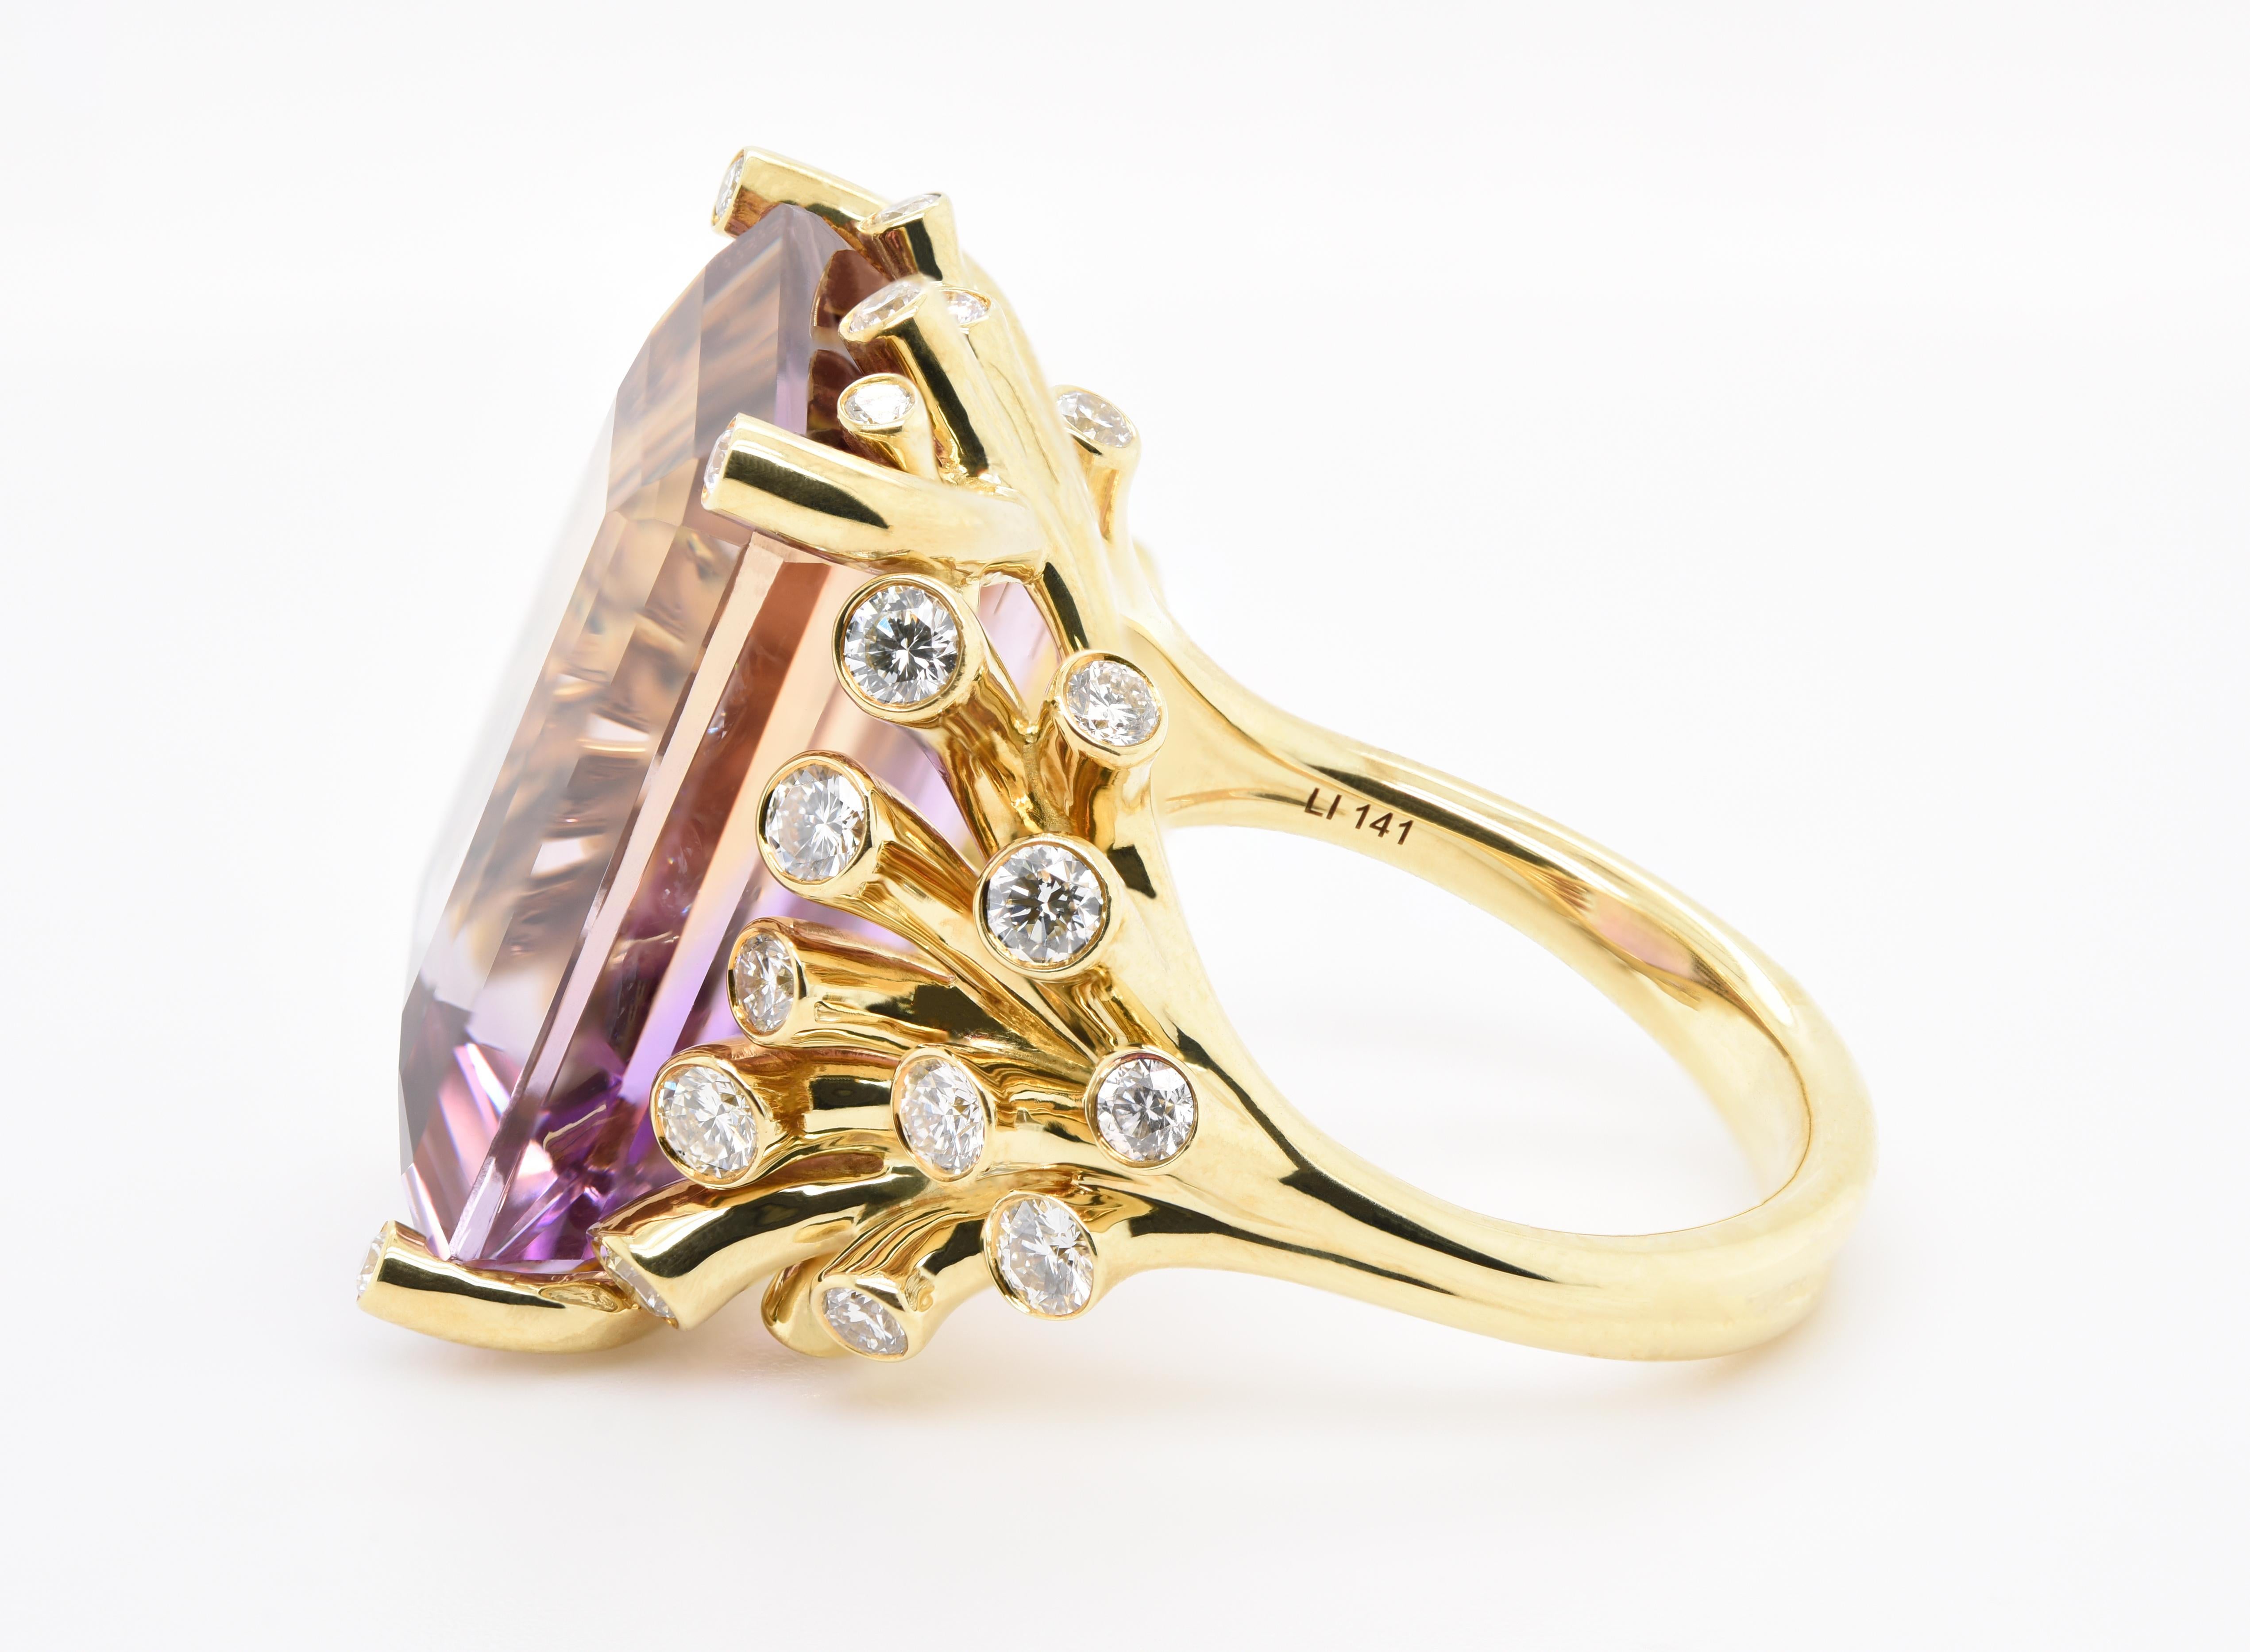  Described as a crown surrounded by the majesty. Ametrine and  diamond 18K yellow gold ring. 18.30 total gemstone weight set in 18K Yellow Gold. Truly one of a kind!

Unapologetic self-expression through jewelry. JAG New York's world class designs